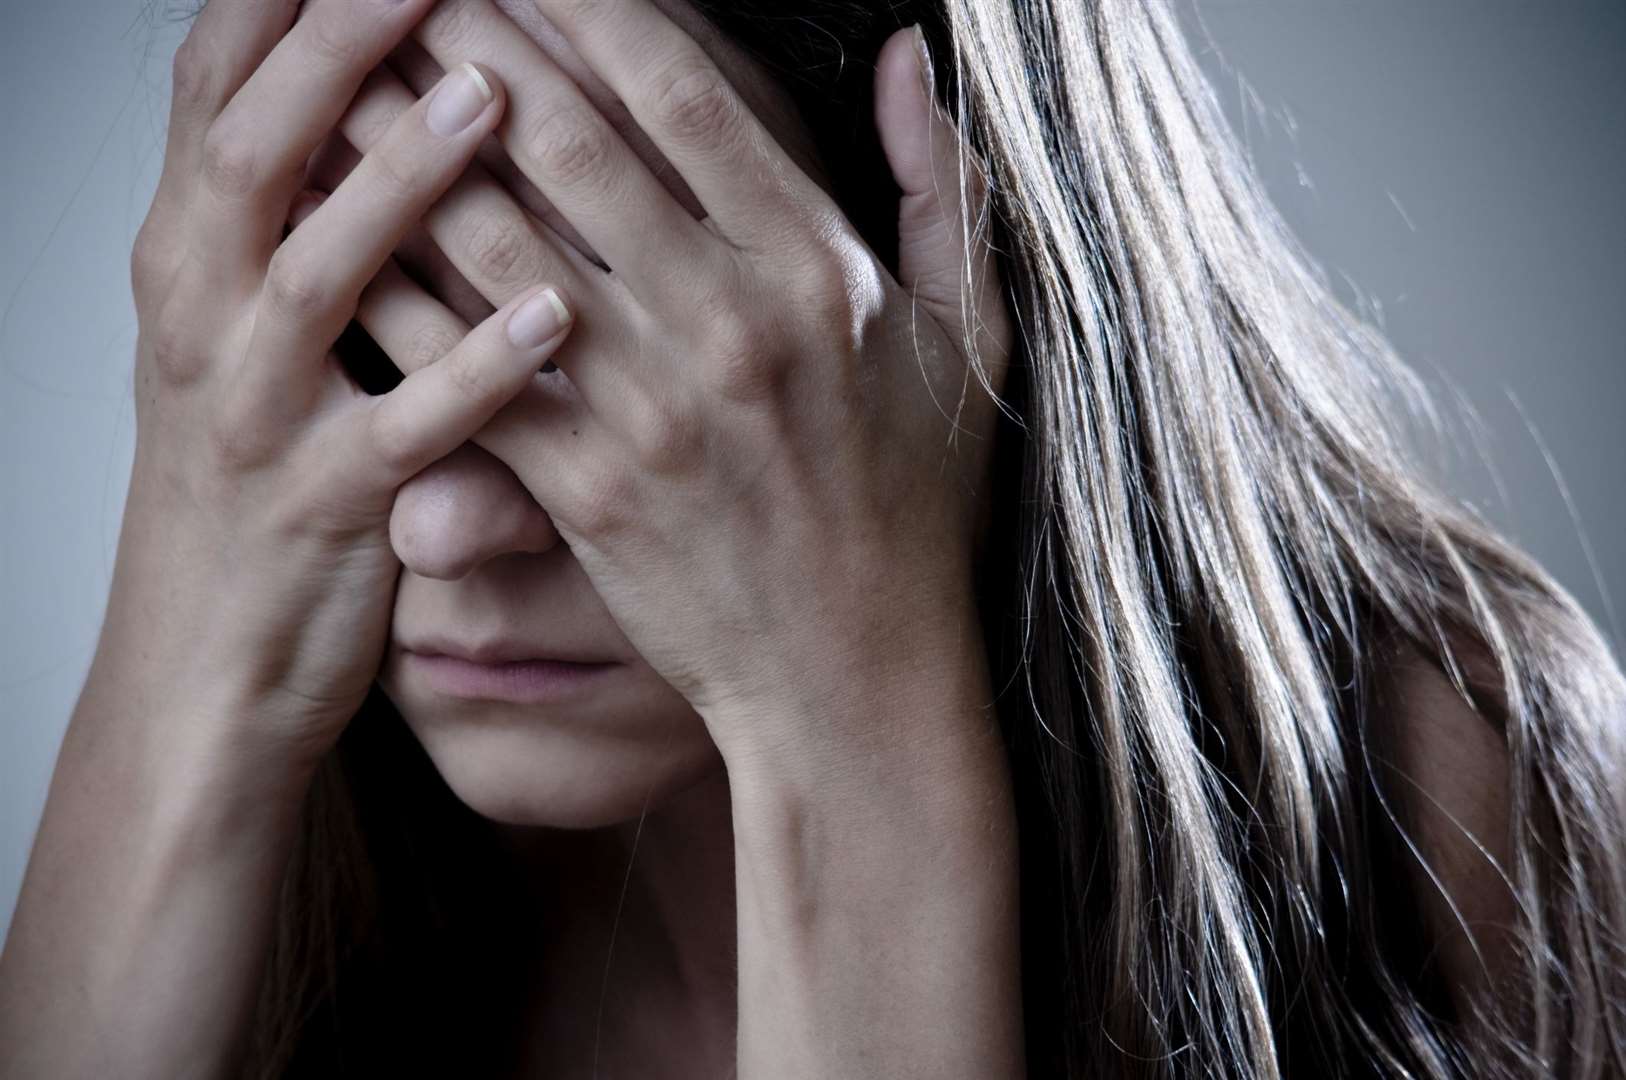 The process is exceptionally stressful especially with the delays, one rape survivor has said. Picture: Thinkstock Image